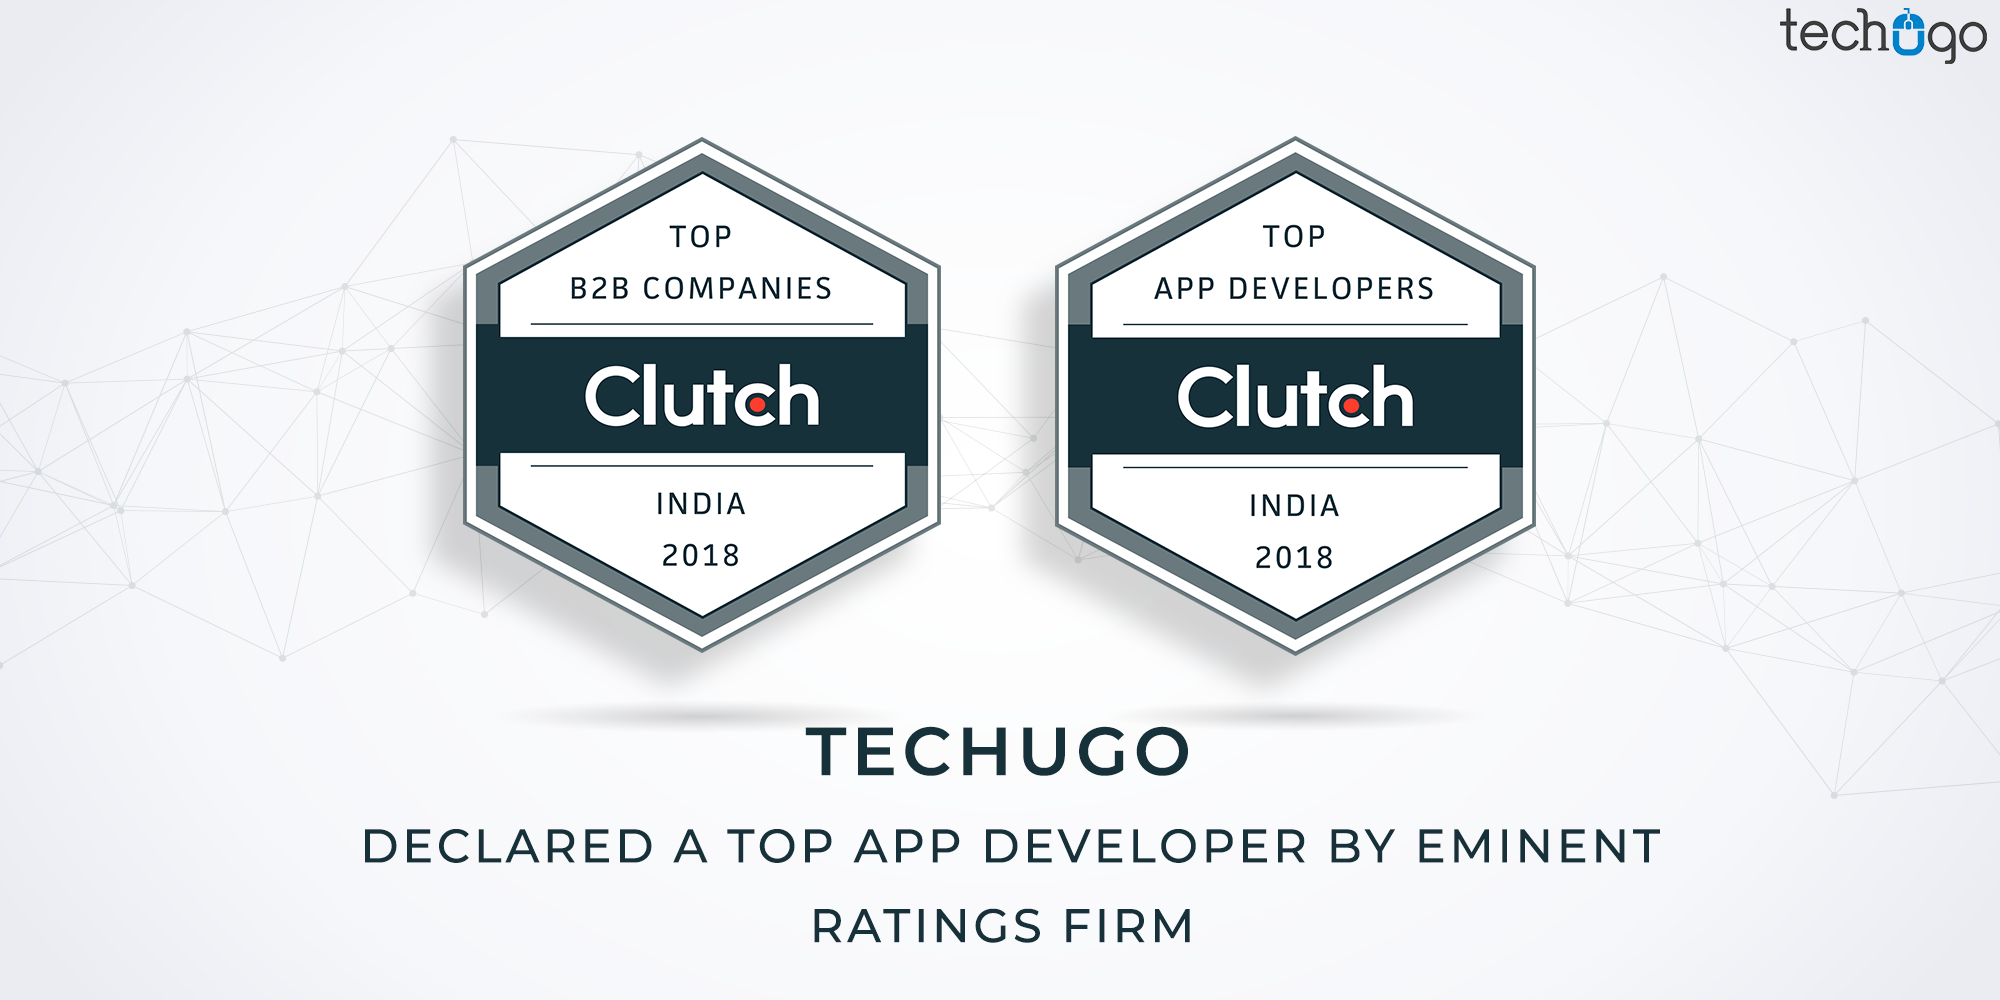 Techugo Declared a Top App Developer By Eminent Ratings Firm